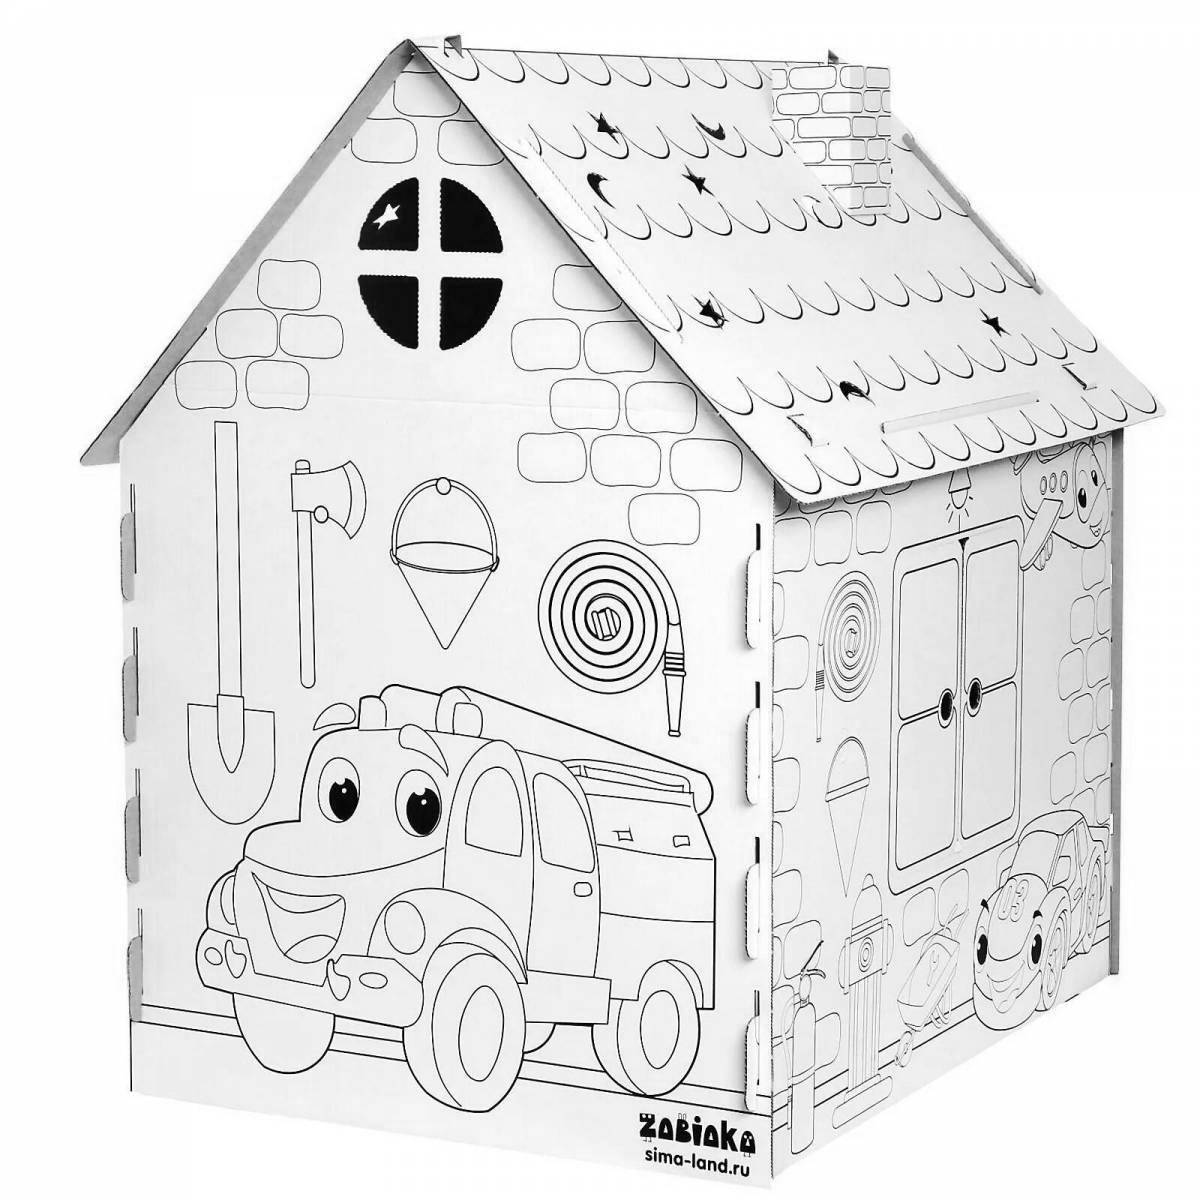 Exquisite cardboard house coloring page